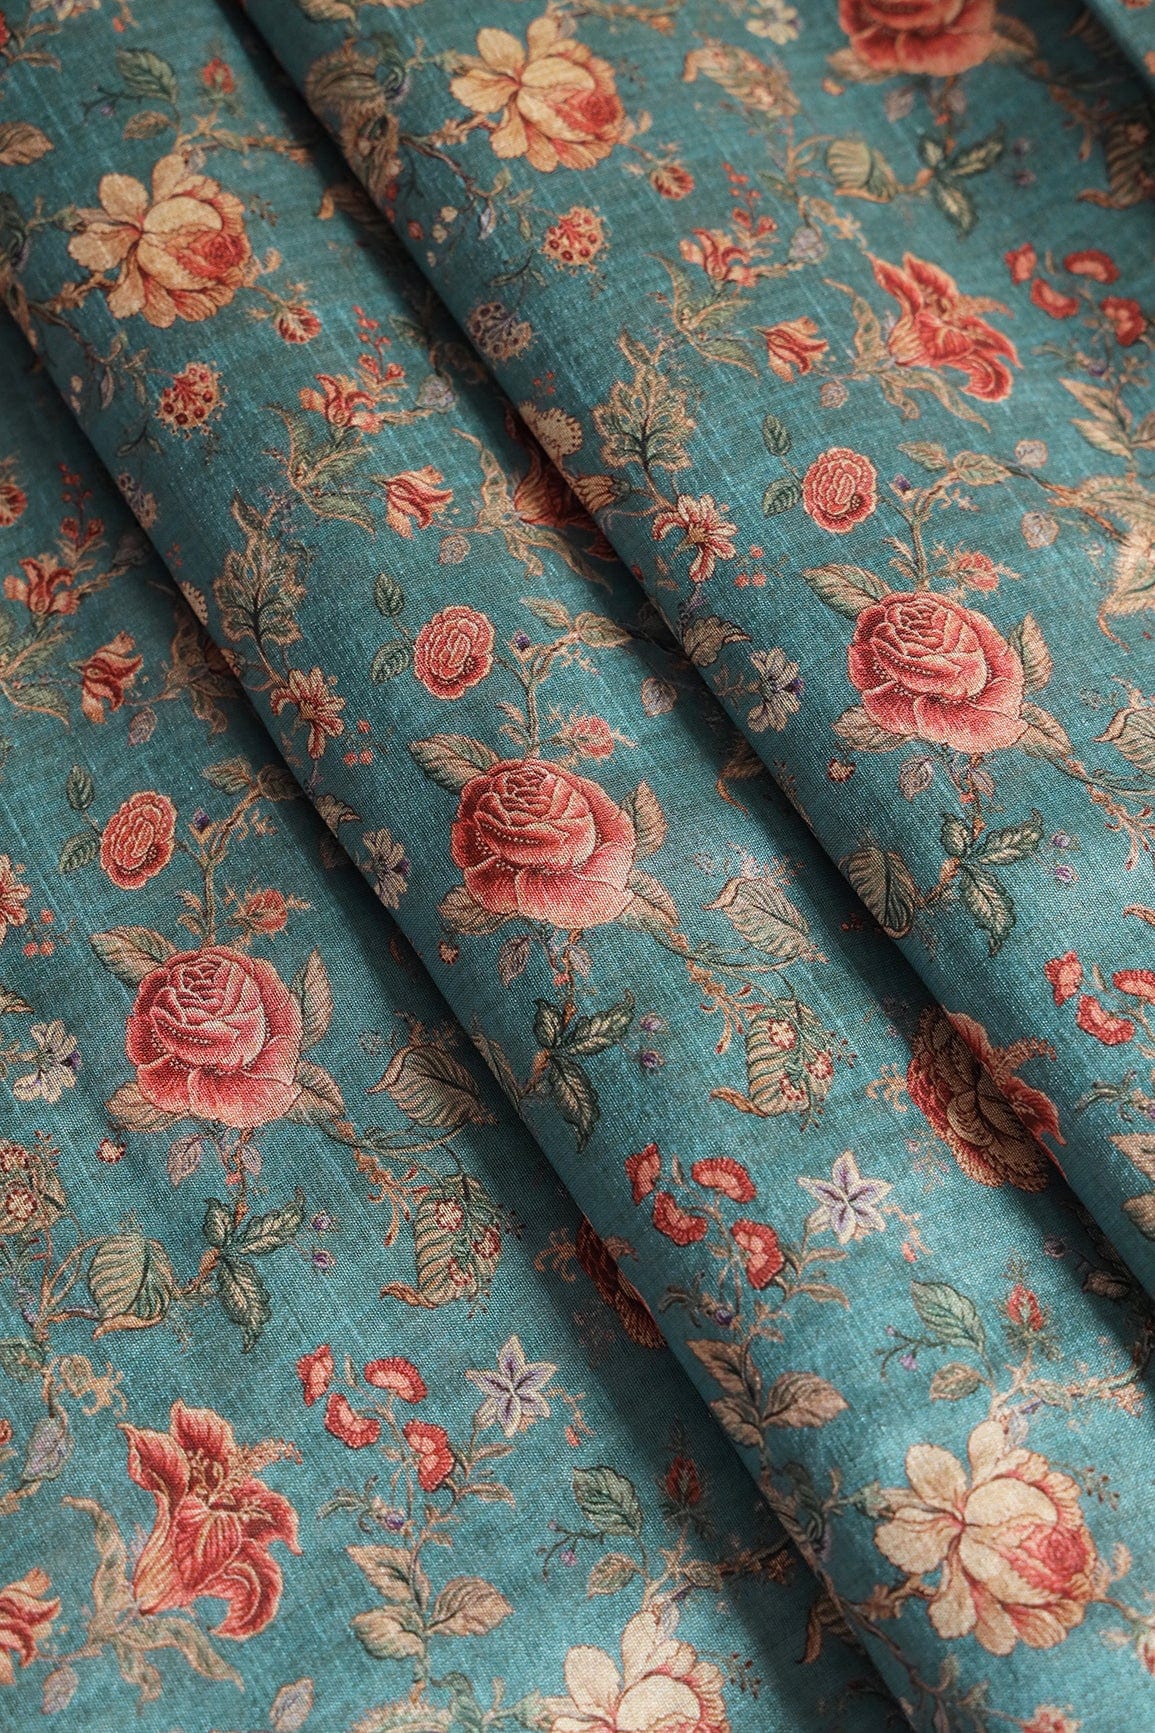 doeraa Prints Red And Yellow Attractive Floral Pattern Digital Print On Teal Blue Mulberry Silk Fabric